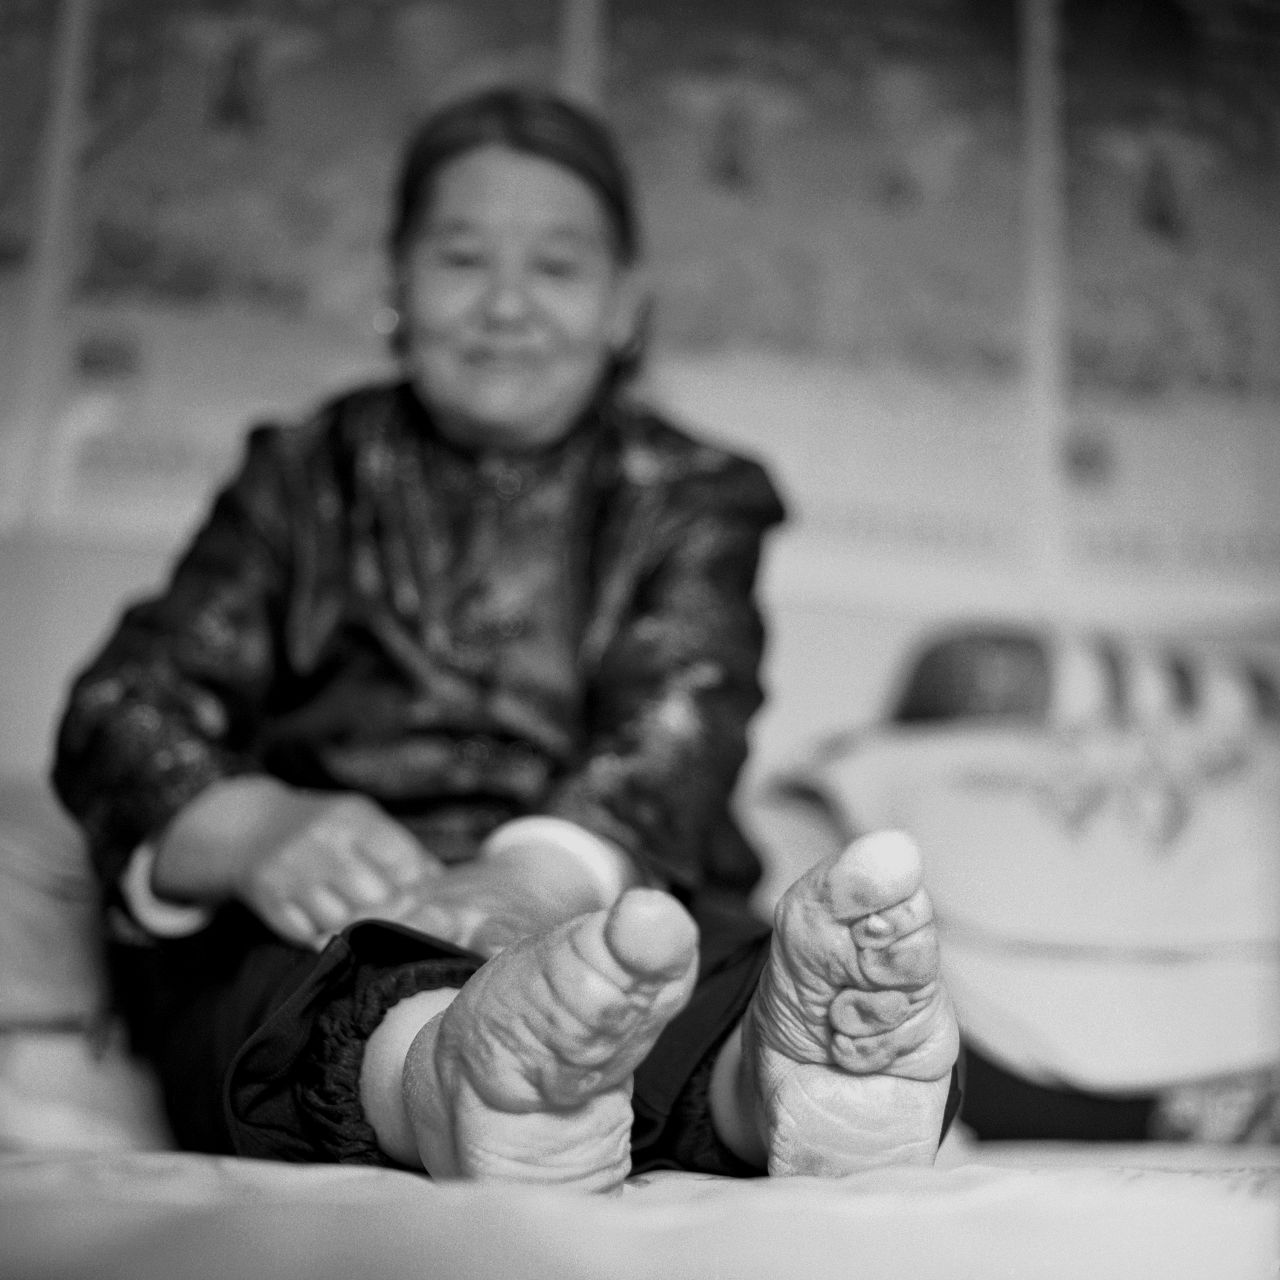 "Su Xi Rong had the most beautiful feet in her village. Her feet had the ideal shape, which not only has the toes wrapped, but also the heel compressed towards the toes to create a crevice in the arch of the foot that was considered highly erotic for the husband," says Farrell.